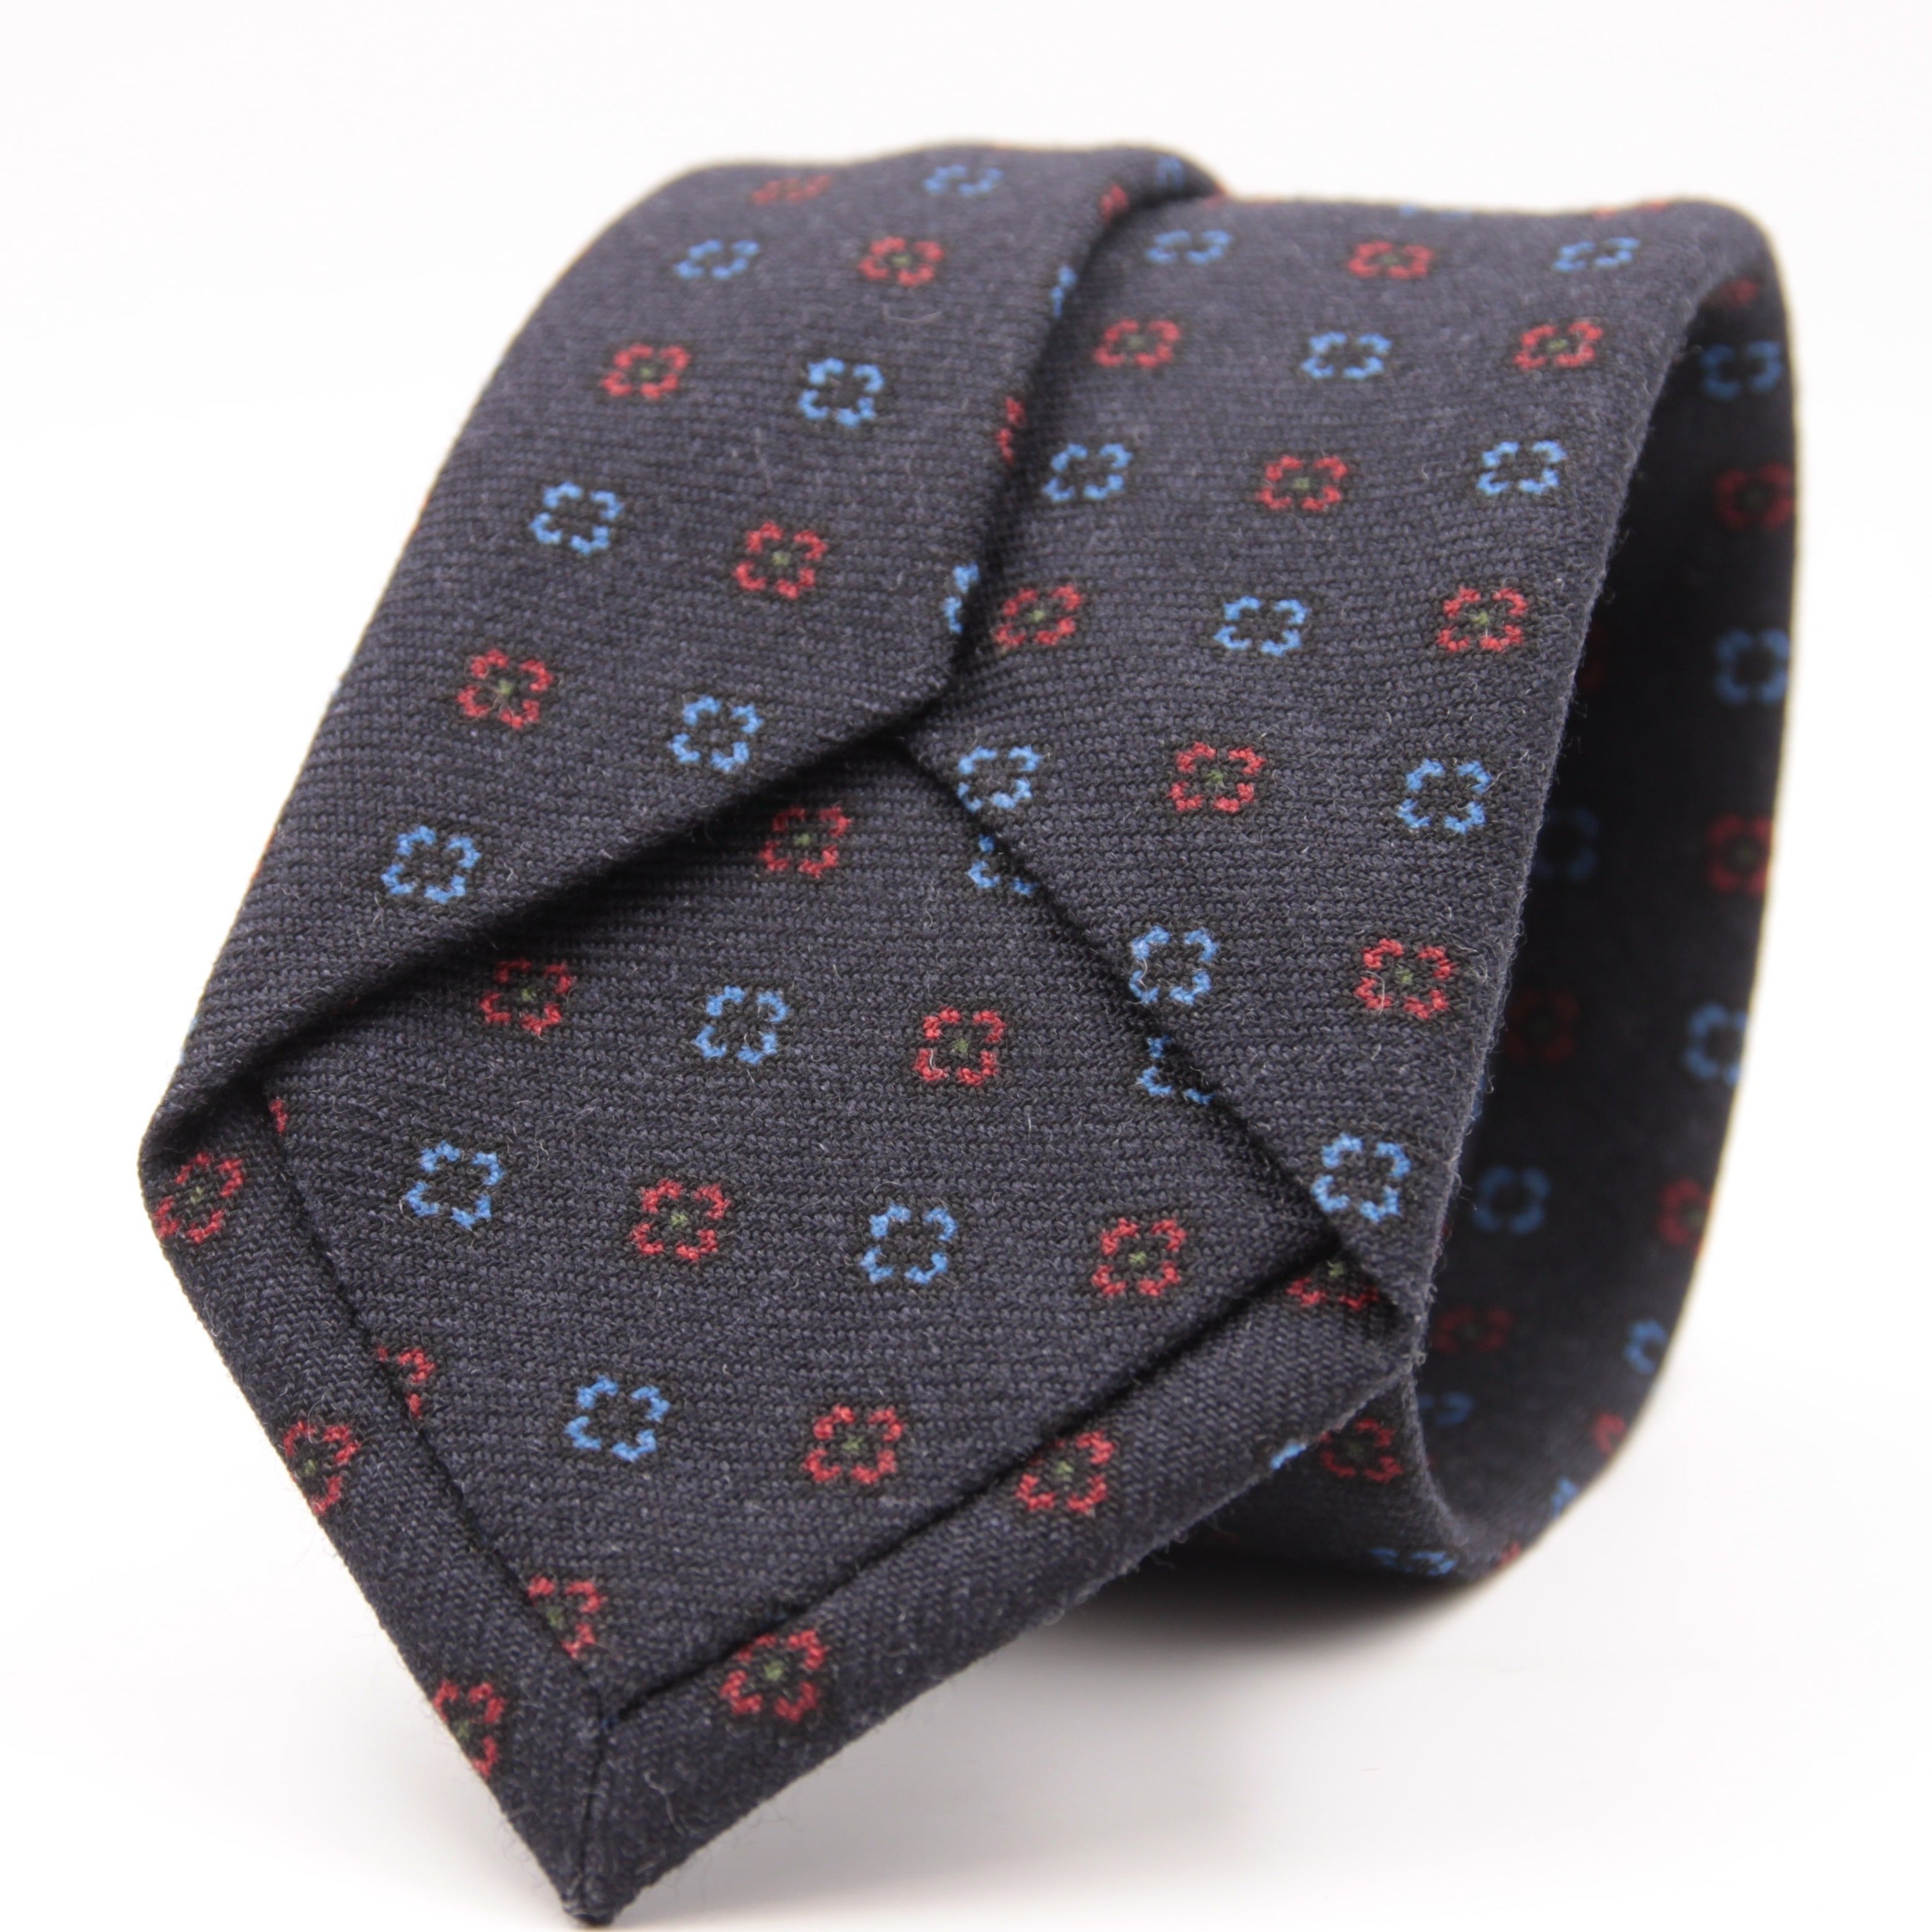 Holliday & Brown for Cruciani & Bella 100% Printed Wool  Tipped Denim Blue, Light Blue and Red Motif tie   Handmade in Italy 8 cm x 148 cm #5090